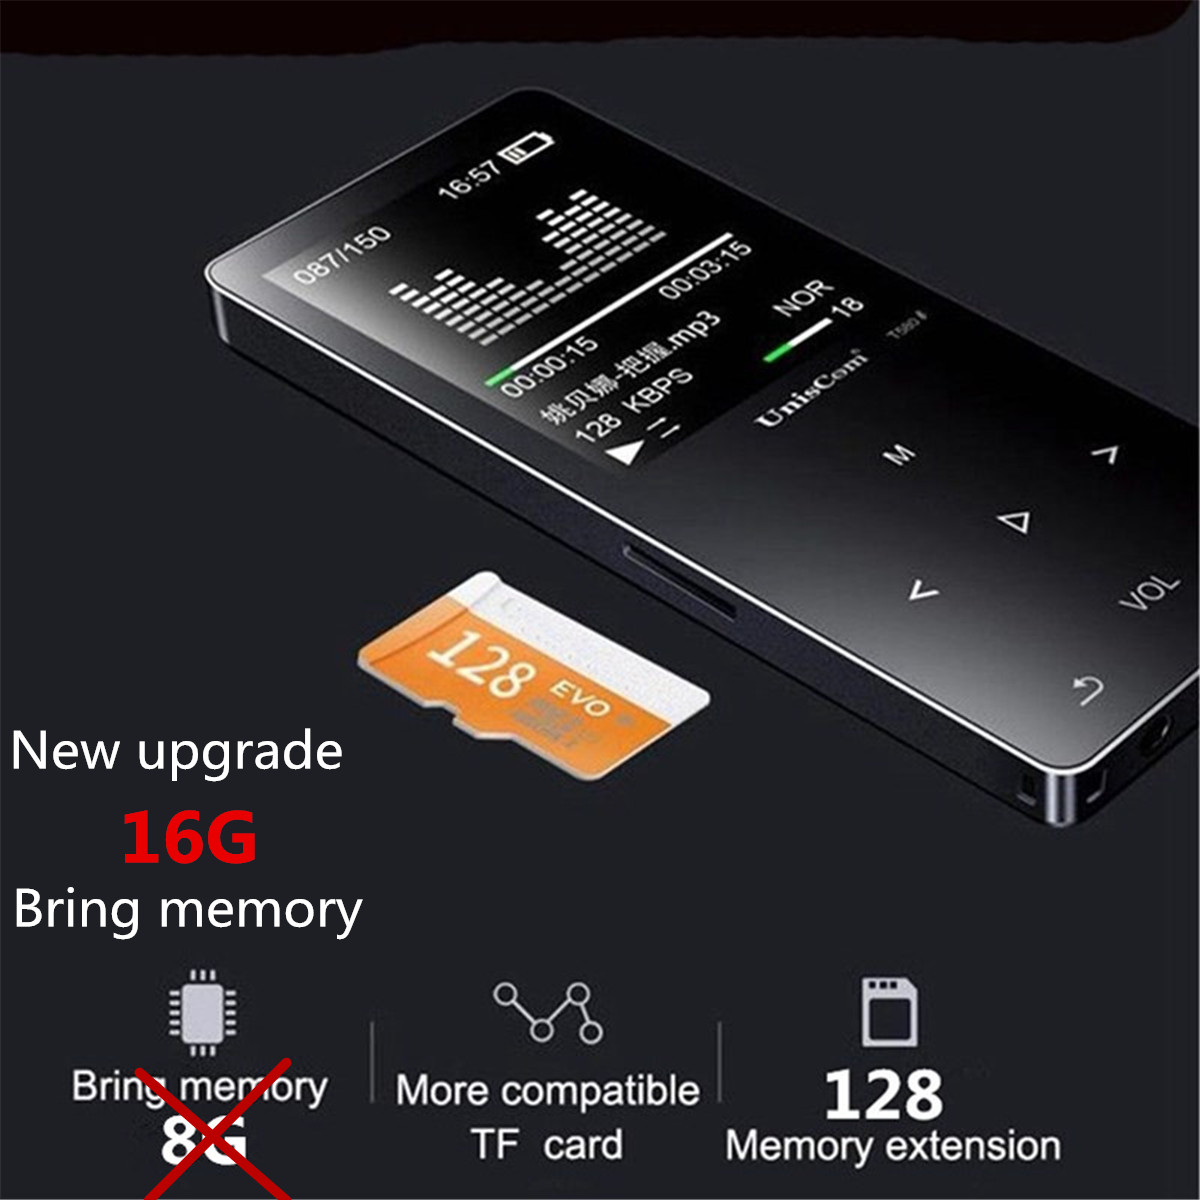 Uniscom 8G 1.8 Inch Screen bluetooth Lossless HIFI MP3 Music Player Support A-B Repeat Voice Record 2